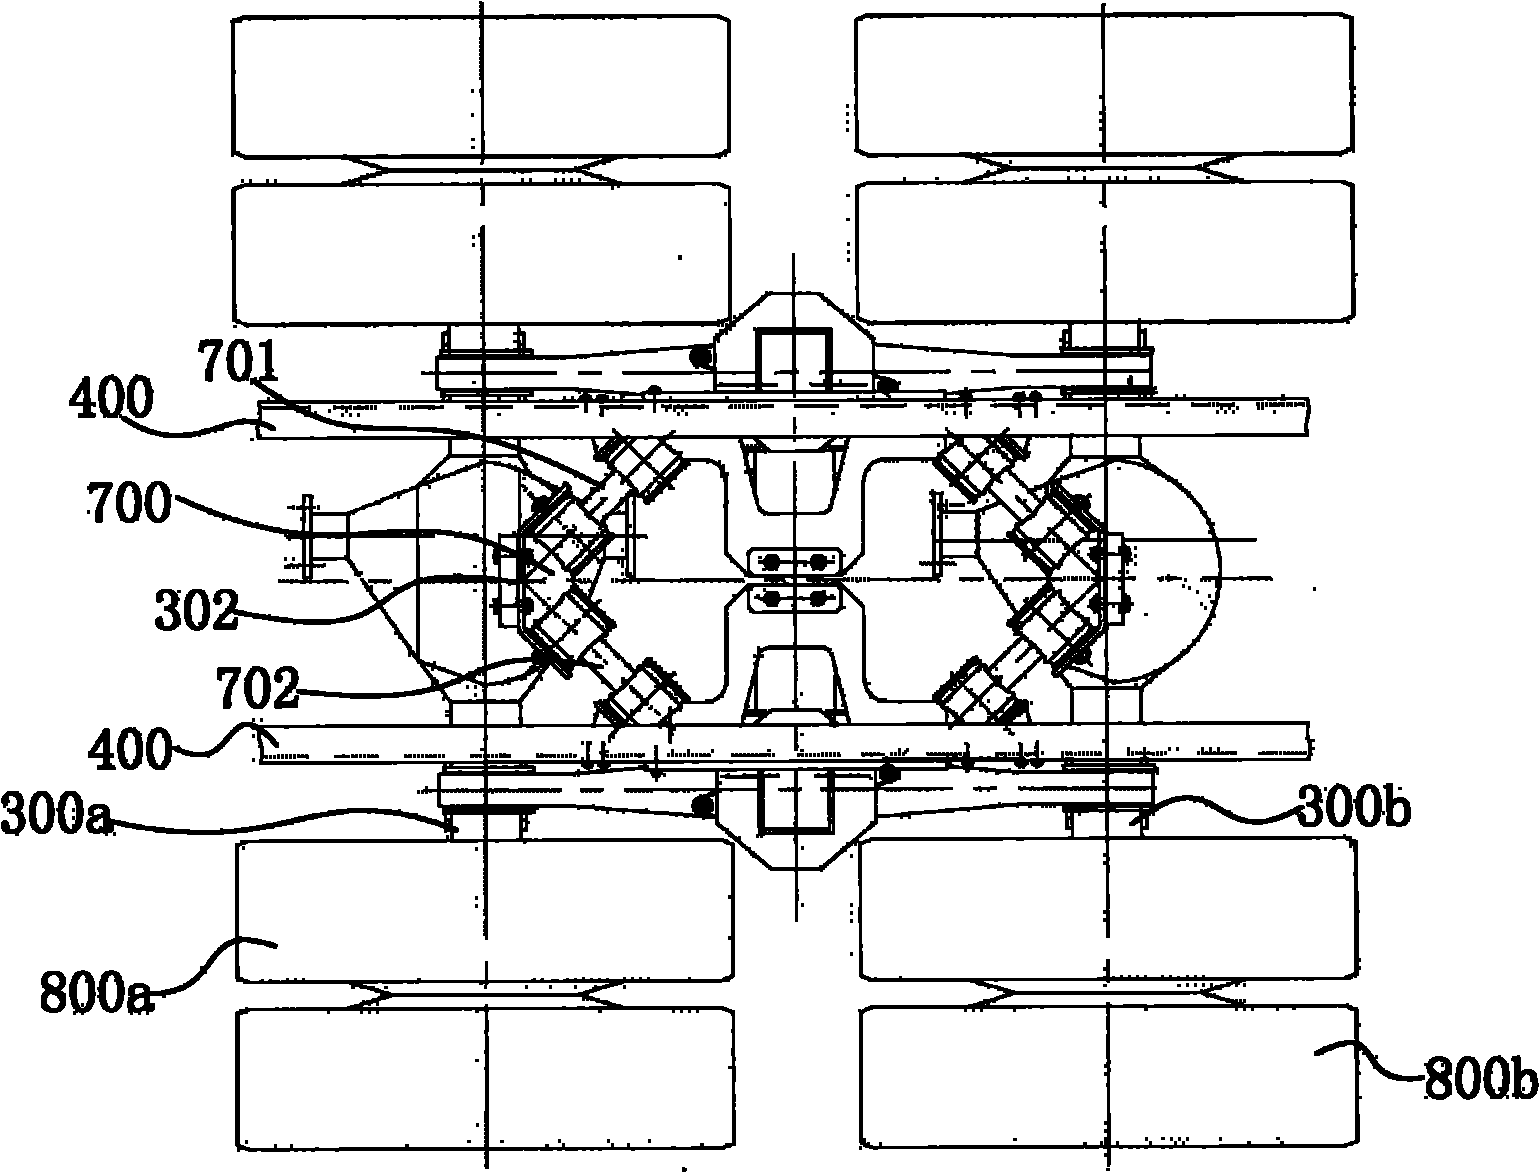 Suspension system with linkage of two vehicle axles